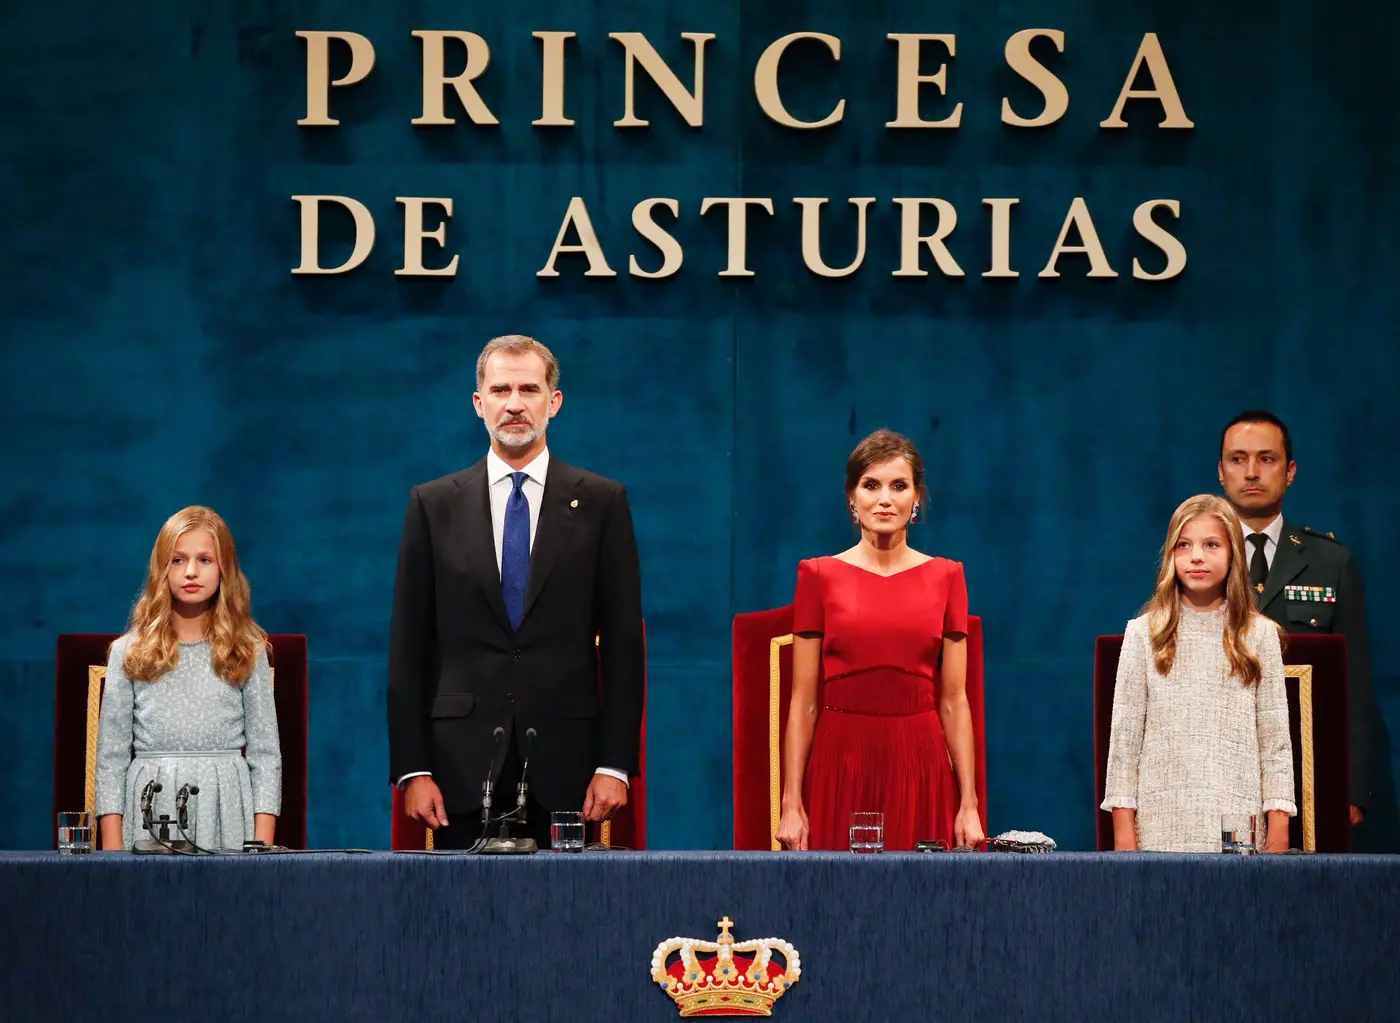 King Felipe and queen Letizia were proud parents when Princess Leonore presented the awards and her first speech